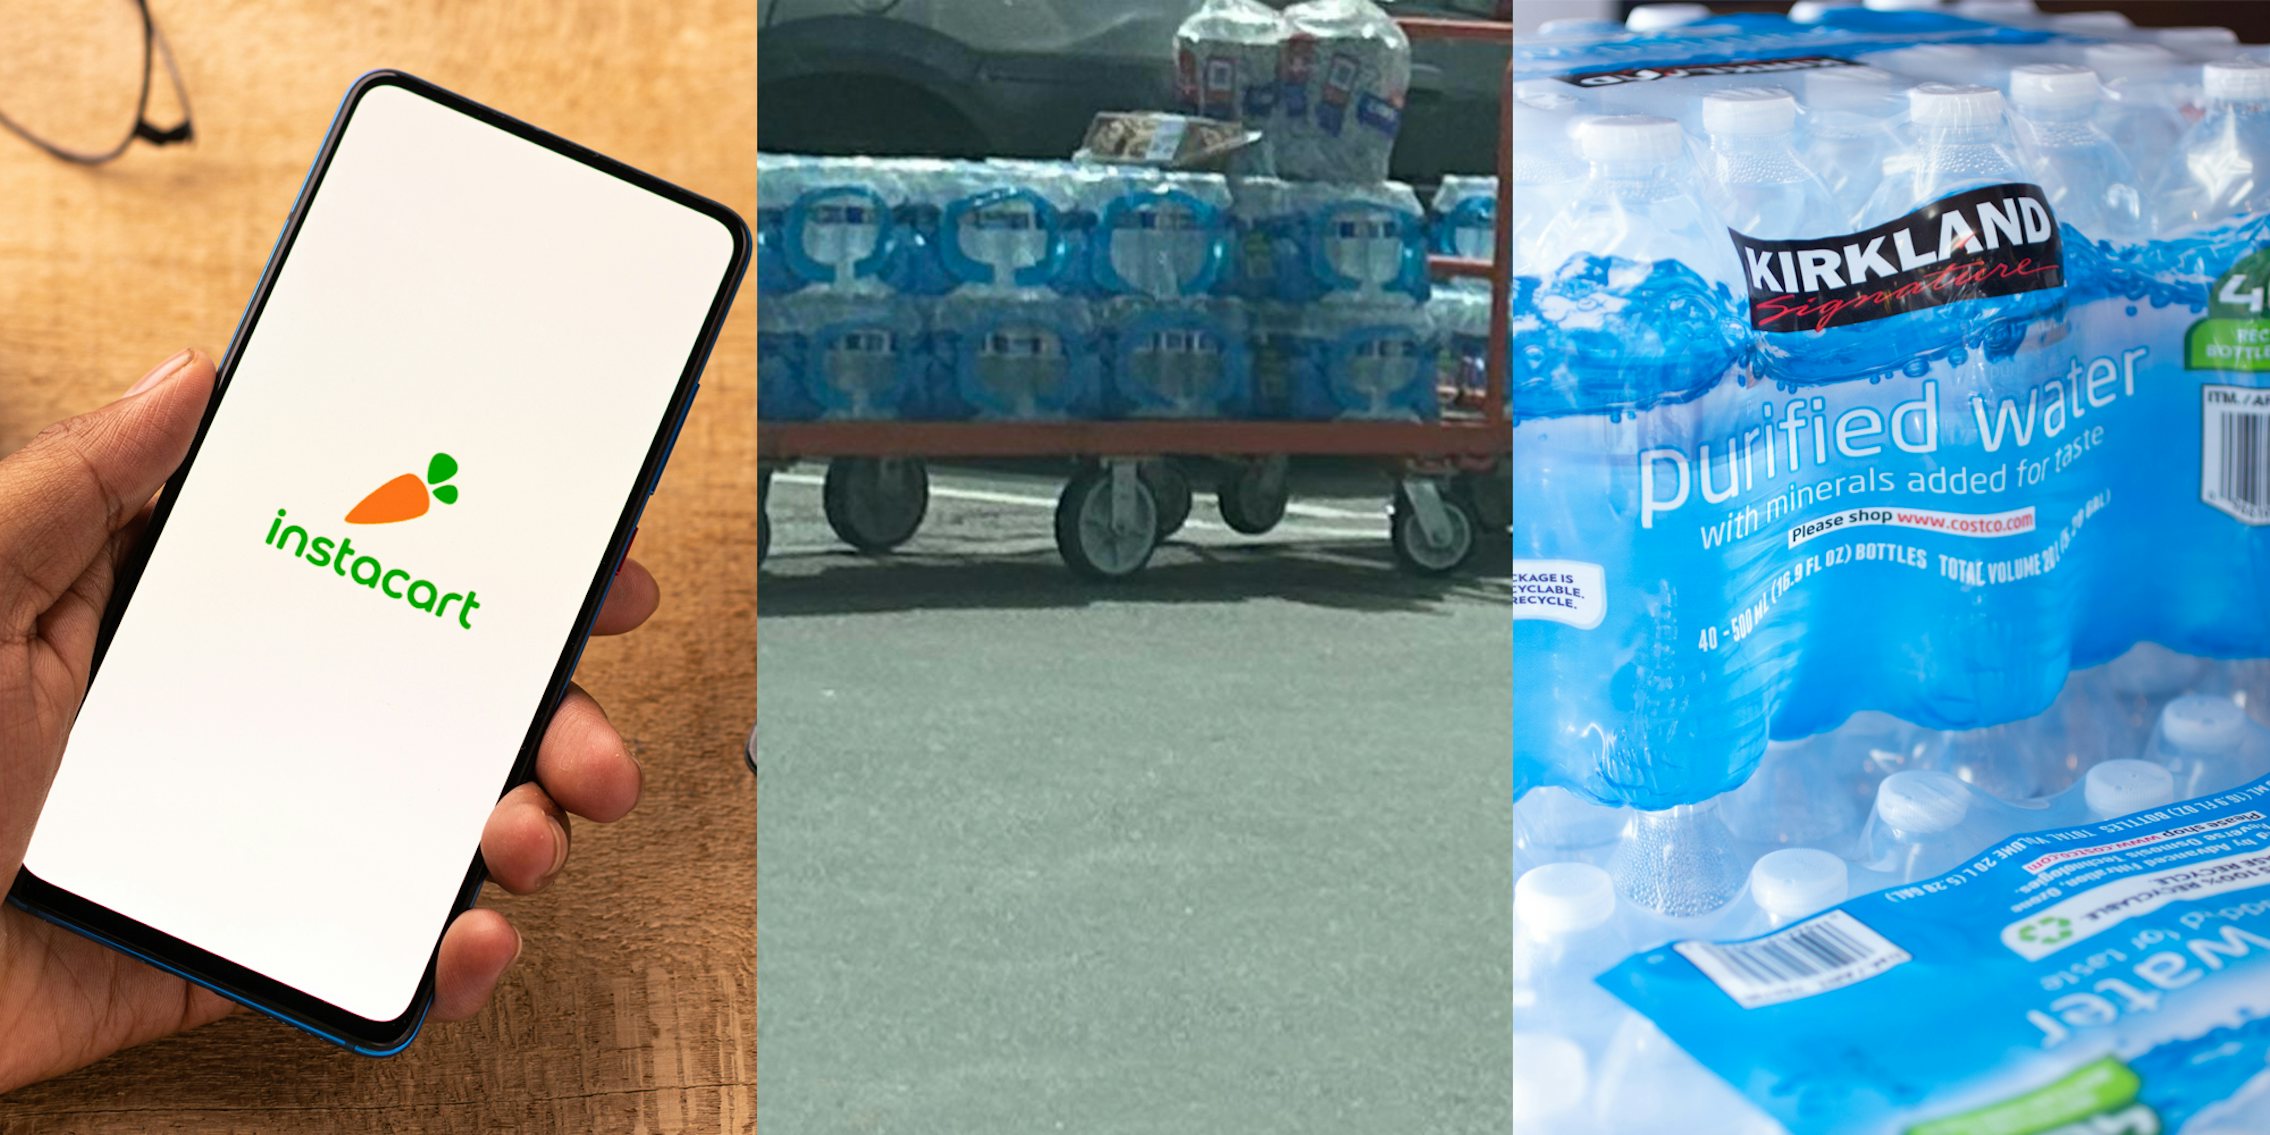 Instacart app open on phone screen in hand in front of wooden background (l) waters on large trolly (c) Kirkland bottles of water (r)